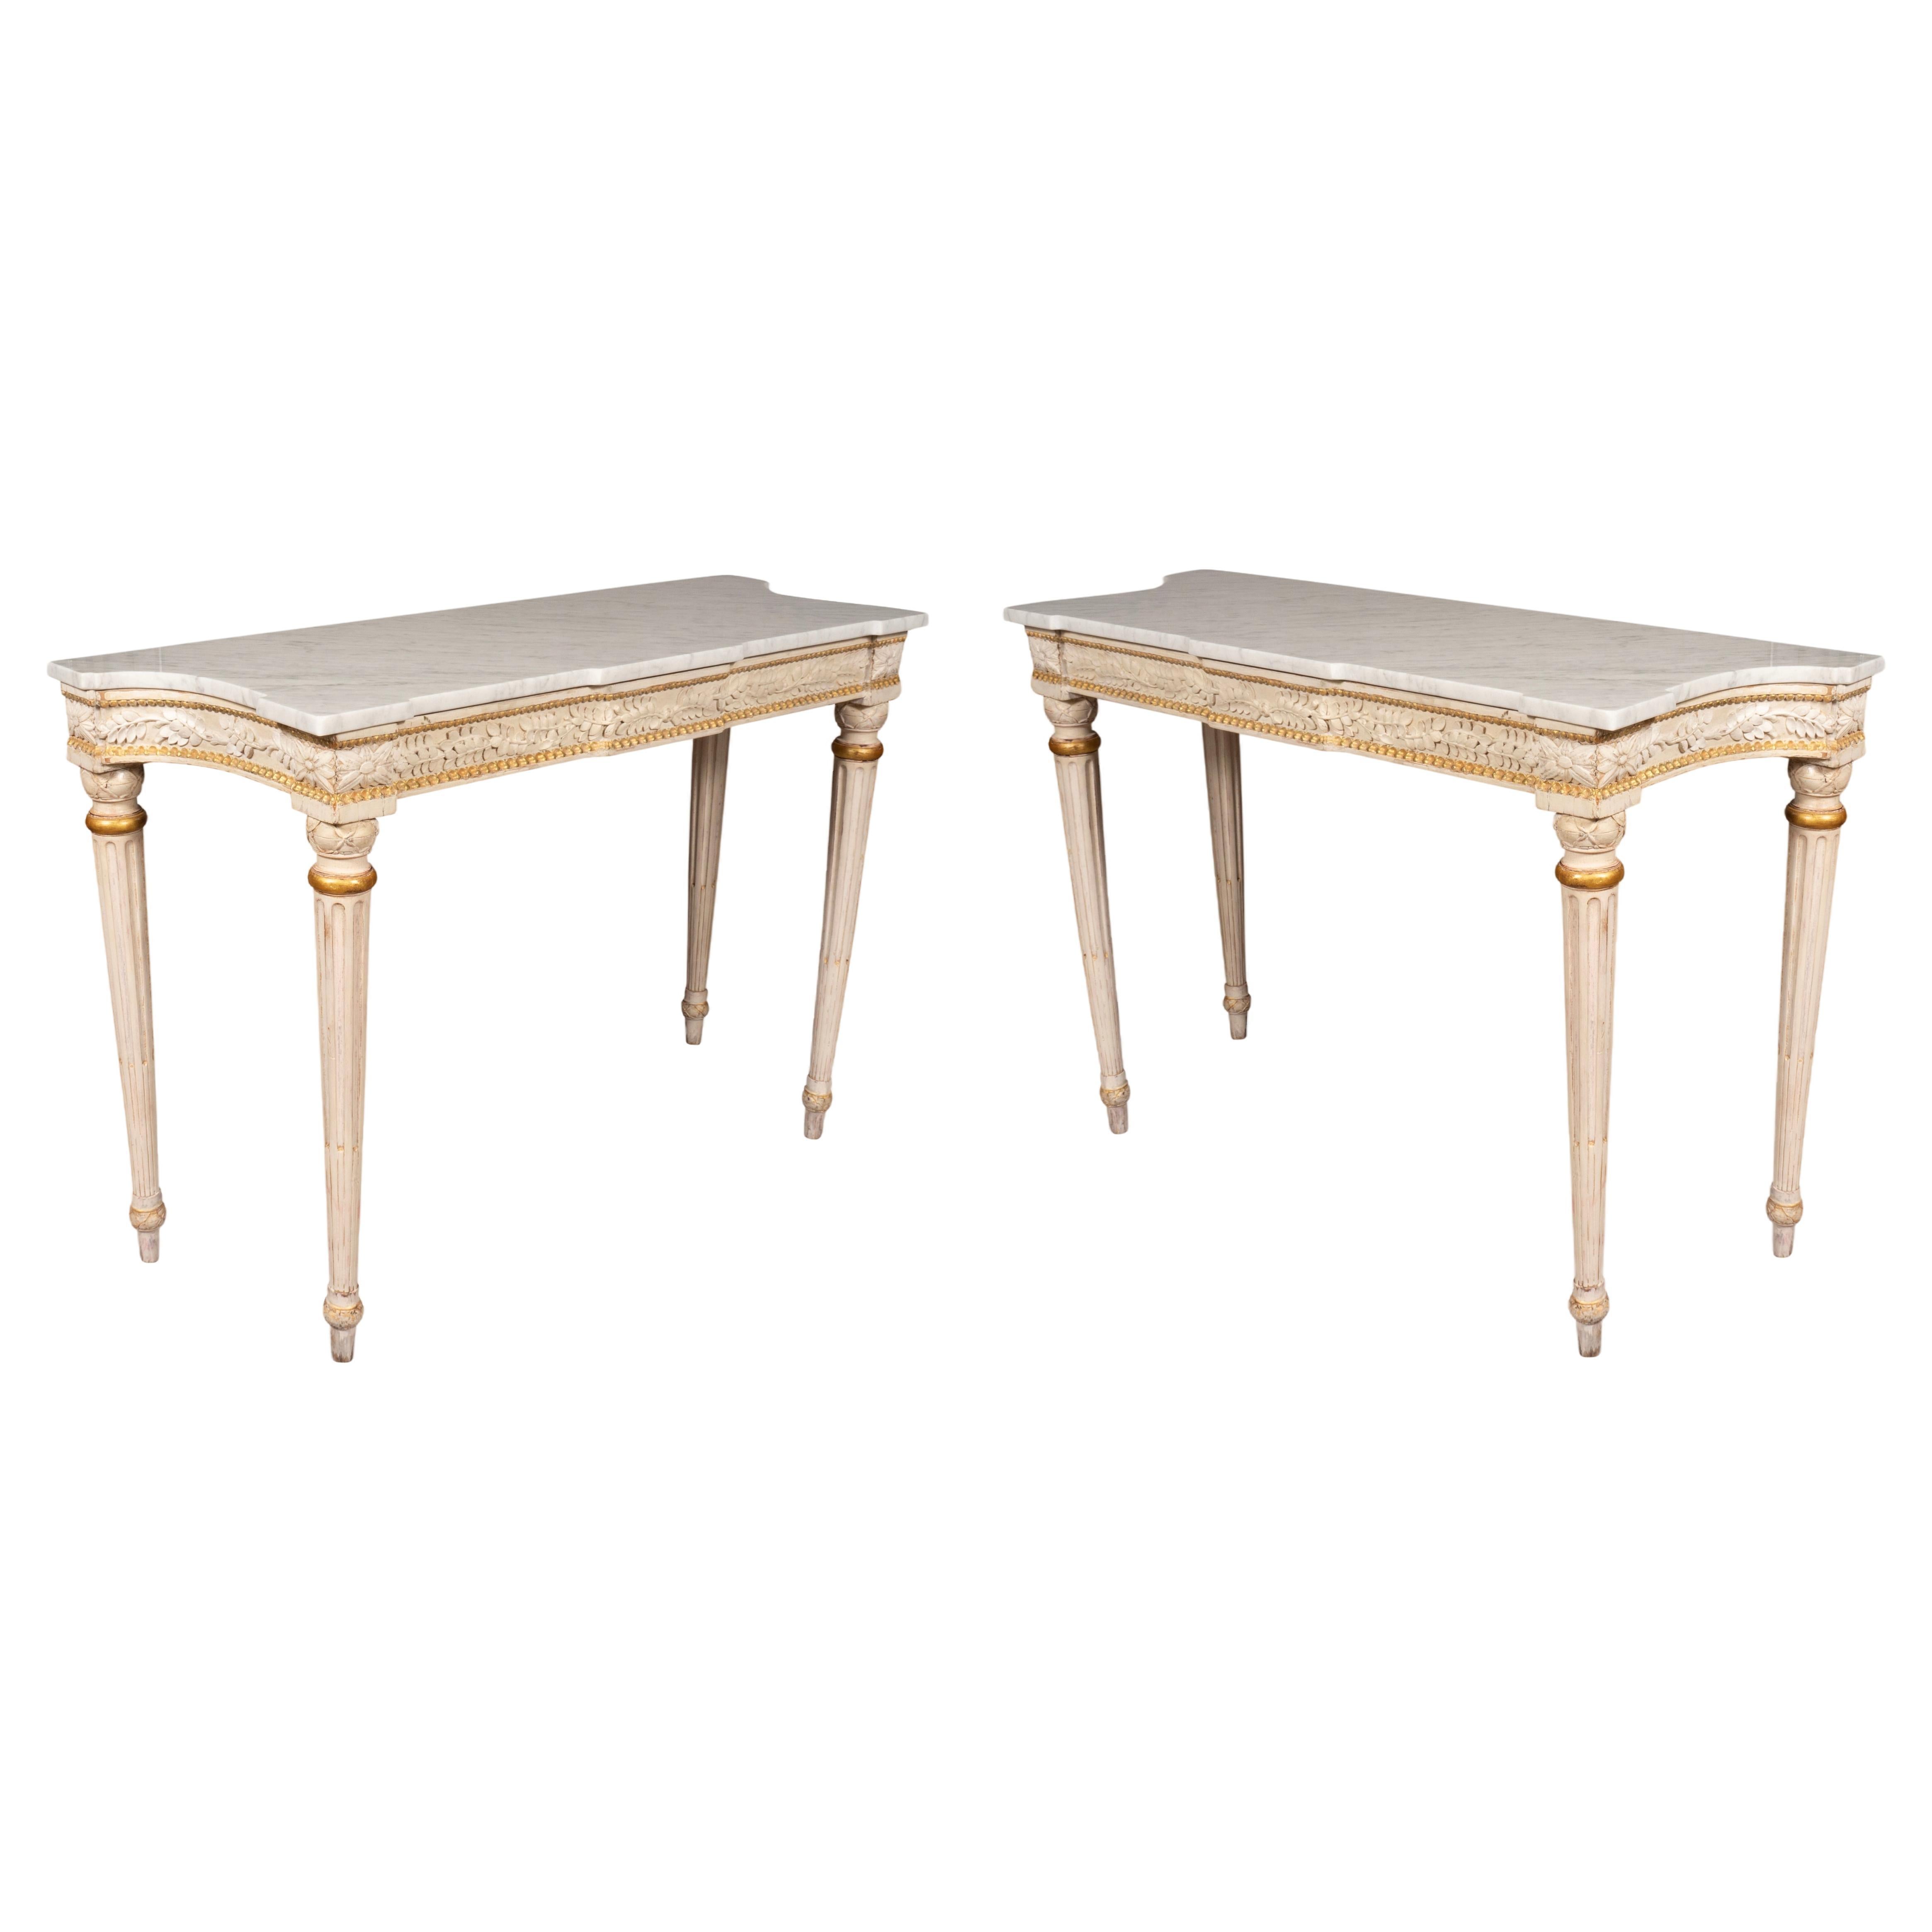 Pair Of Maison Jansen Painted Console Tables From The Waldorf Towers For Sale